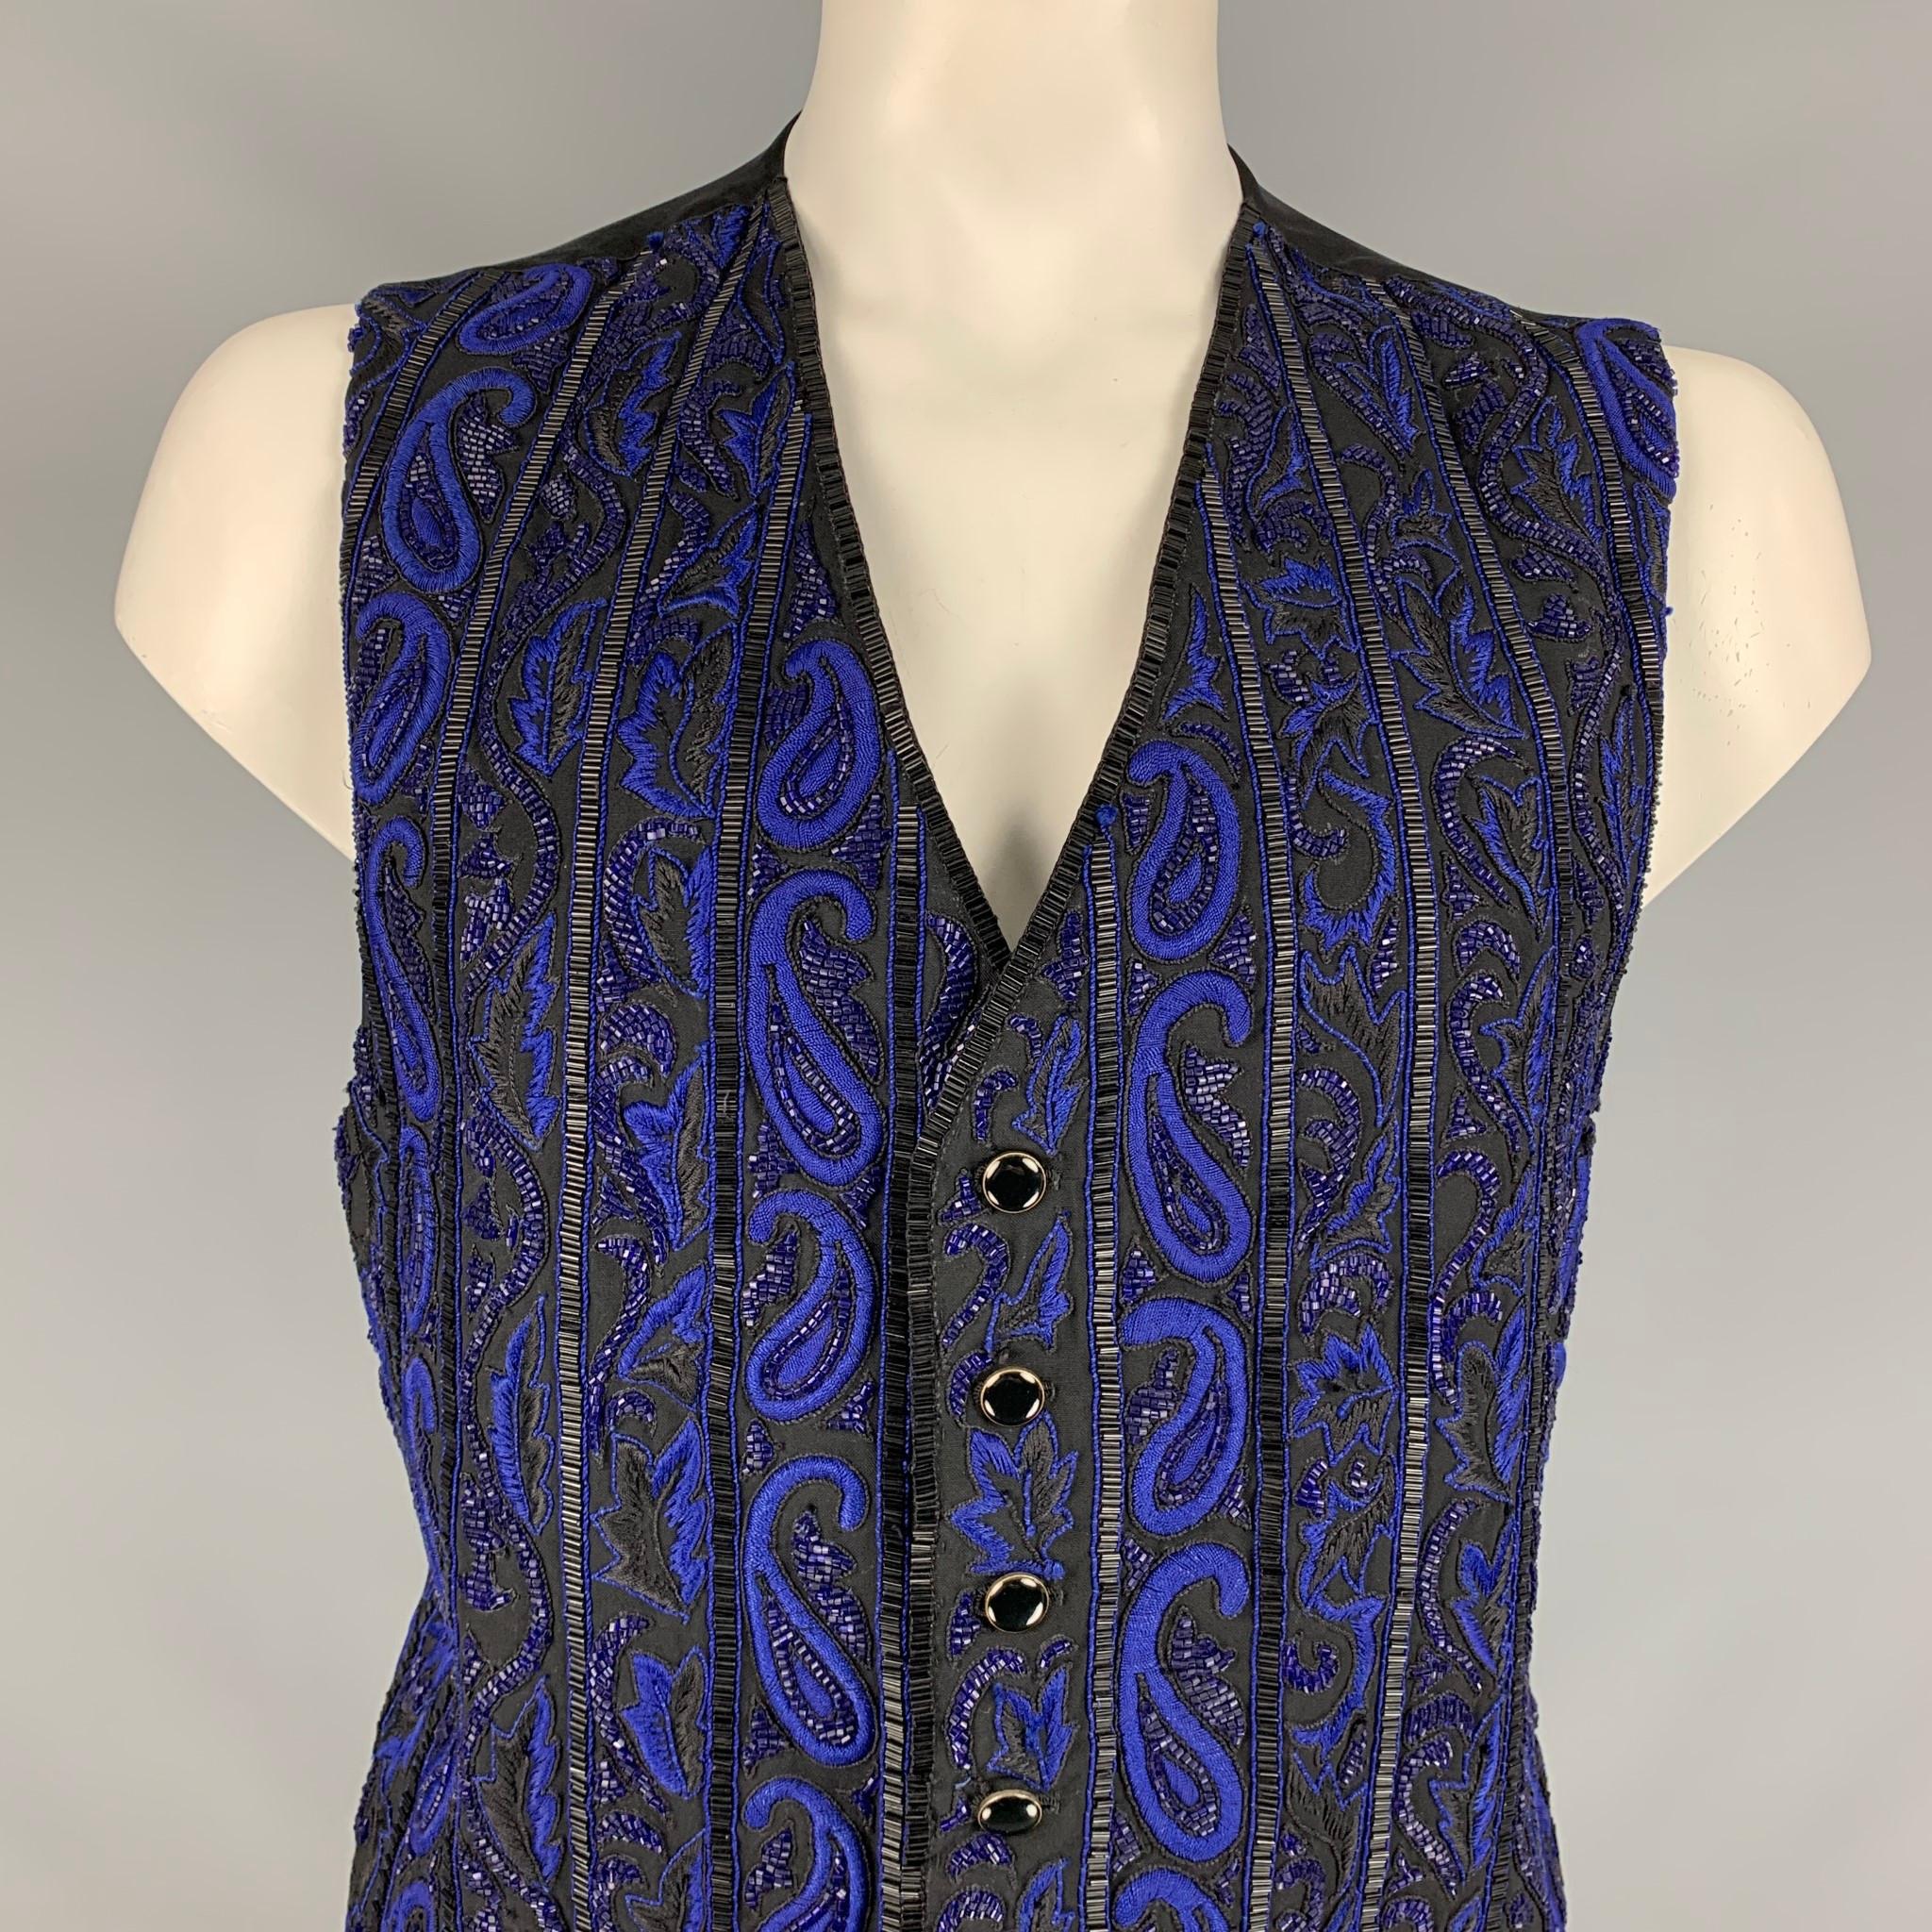 CUSTOM MADE vest comes in a black & blue beaded material featuring a back belt and a buttoned closure. 

Very Good Pre-Owned Condition. Fabric tag removed.
Marked: Size tag removed.

Measurements:

Shoulder: 15 in.
Chest: 40 in.
Length: 21 in. 